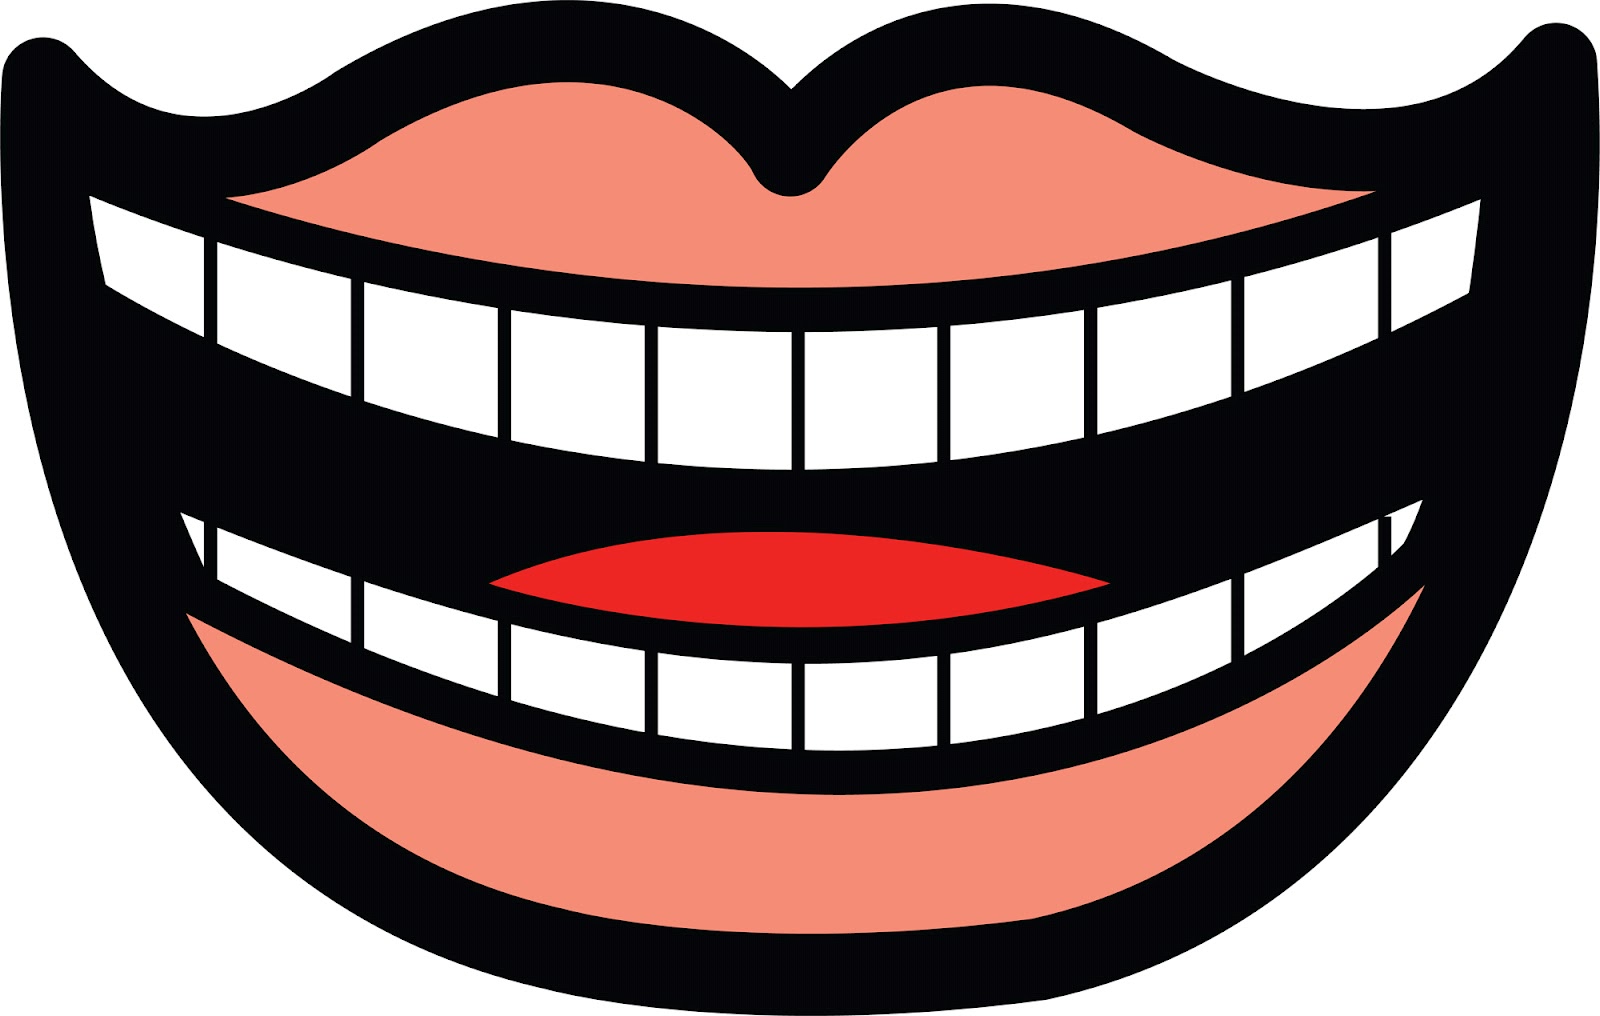 Big mouth clipart